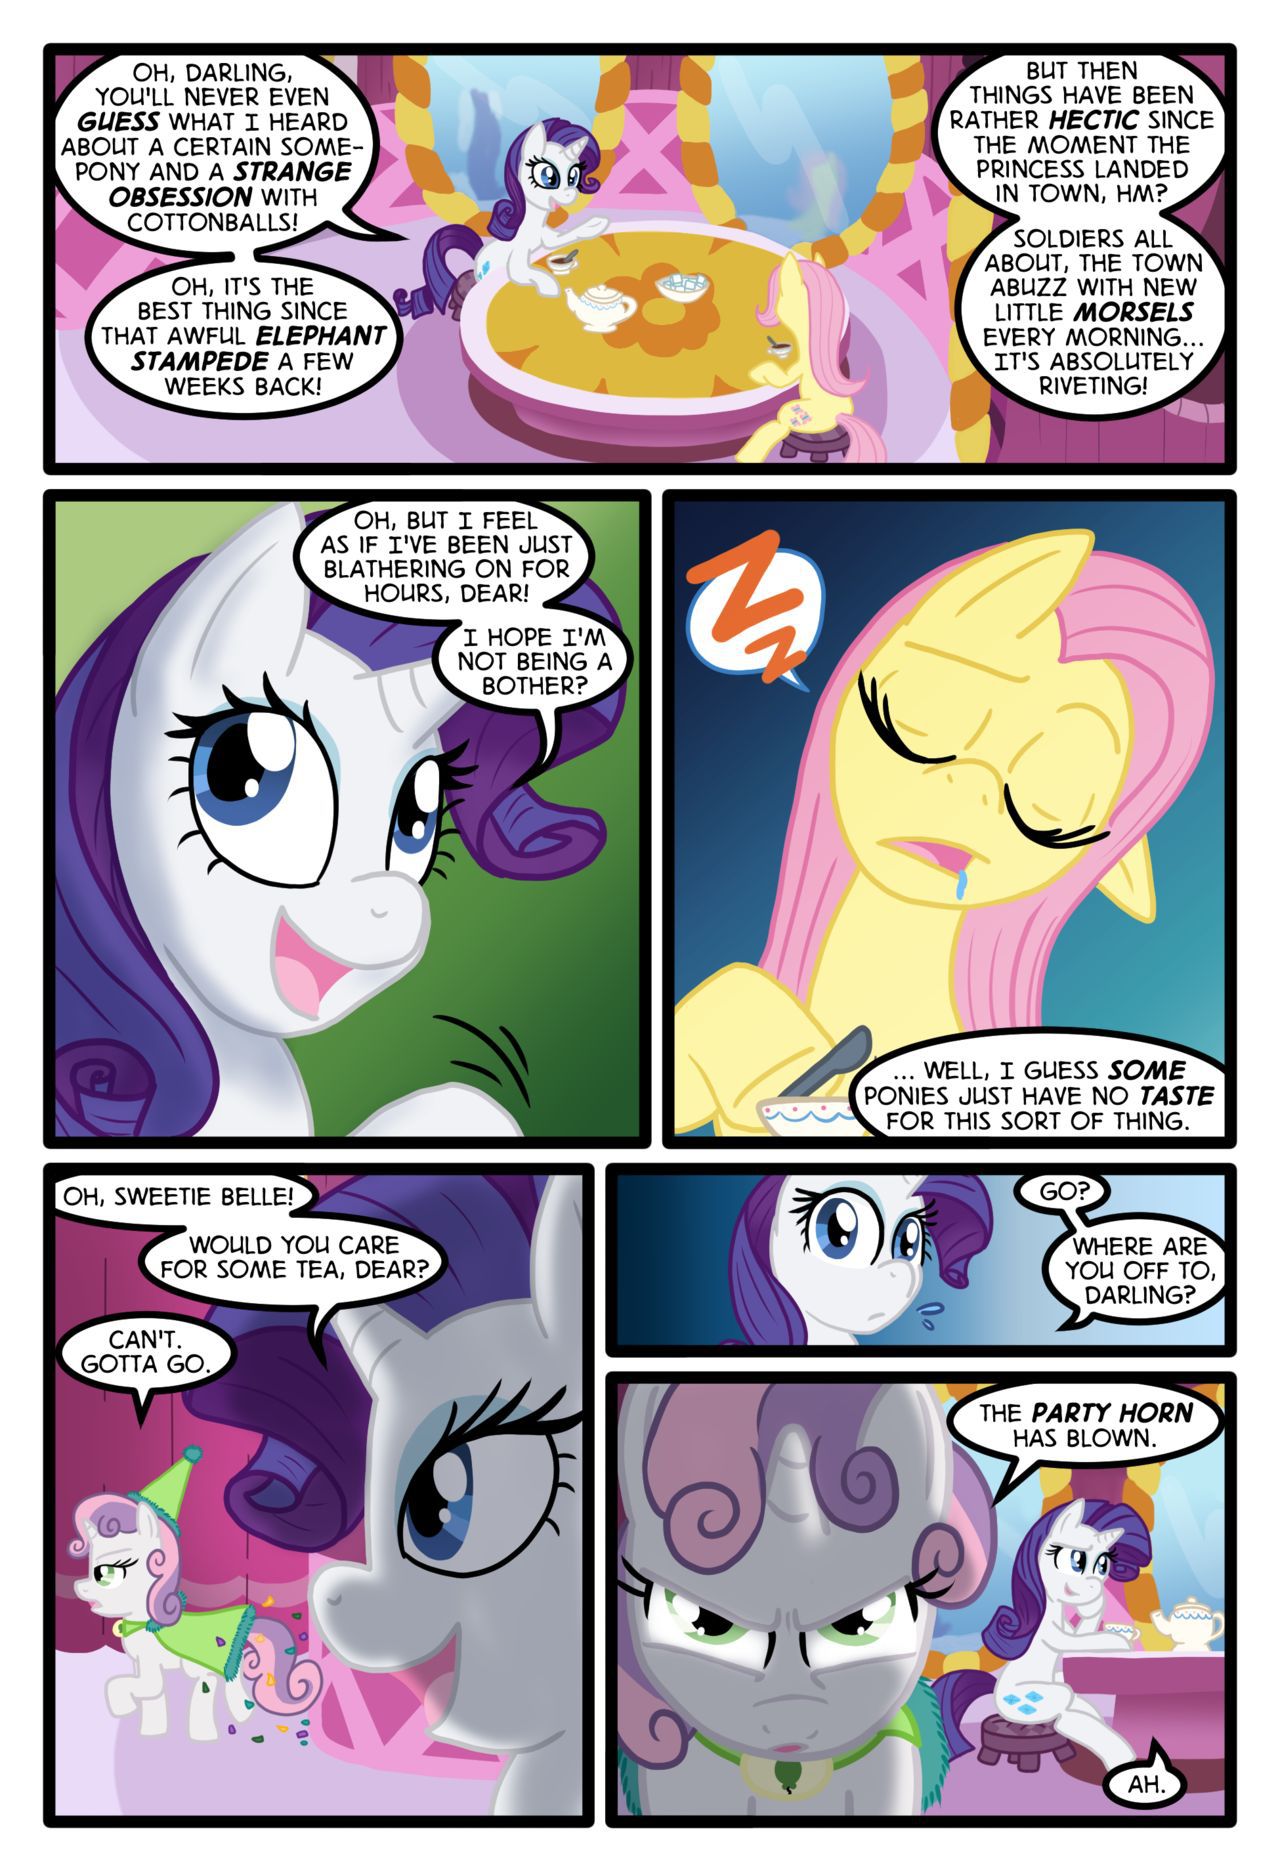 [Zaron] Lonely Hooves (My Little Pony Friendship Is Magic) [Ongoing] 28